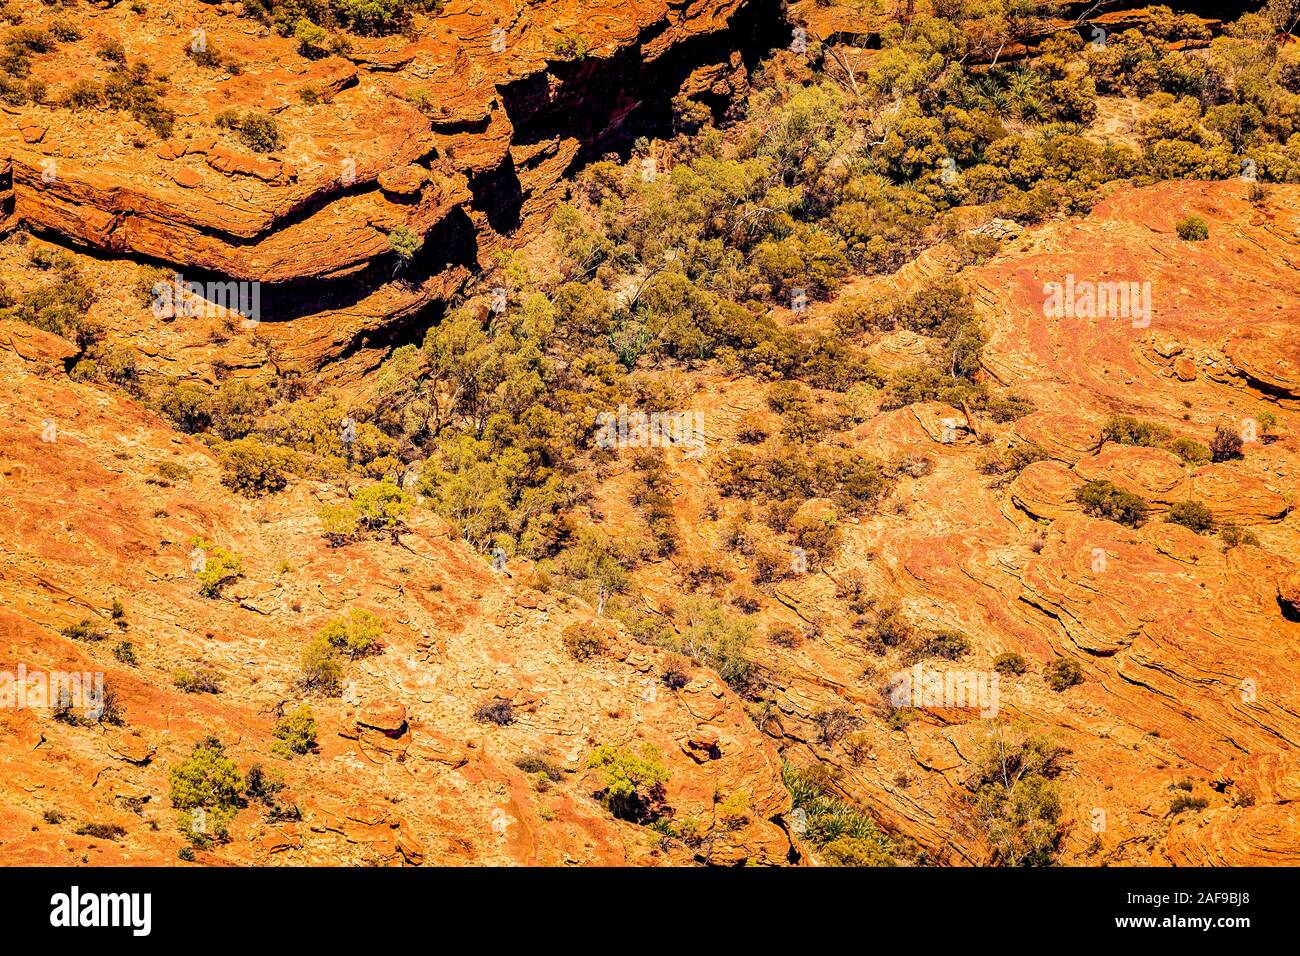 Aerial view of Kings Canyon and the surrounding George Gill Ranges in the remote Northern Territory within central Australia. Stock Photo